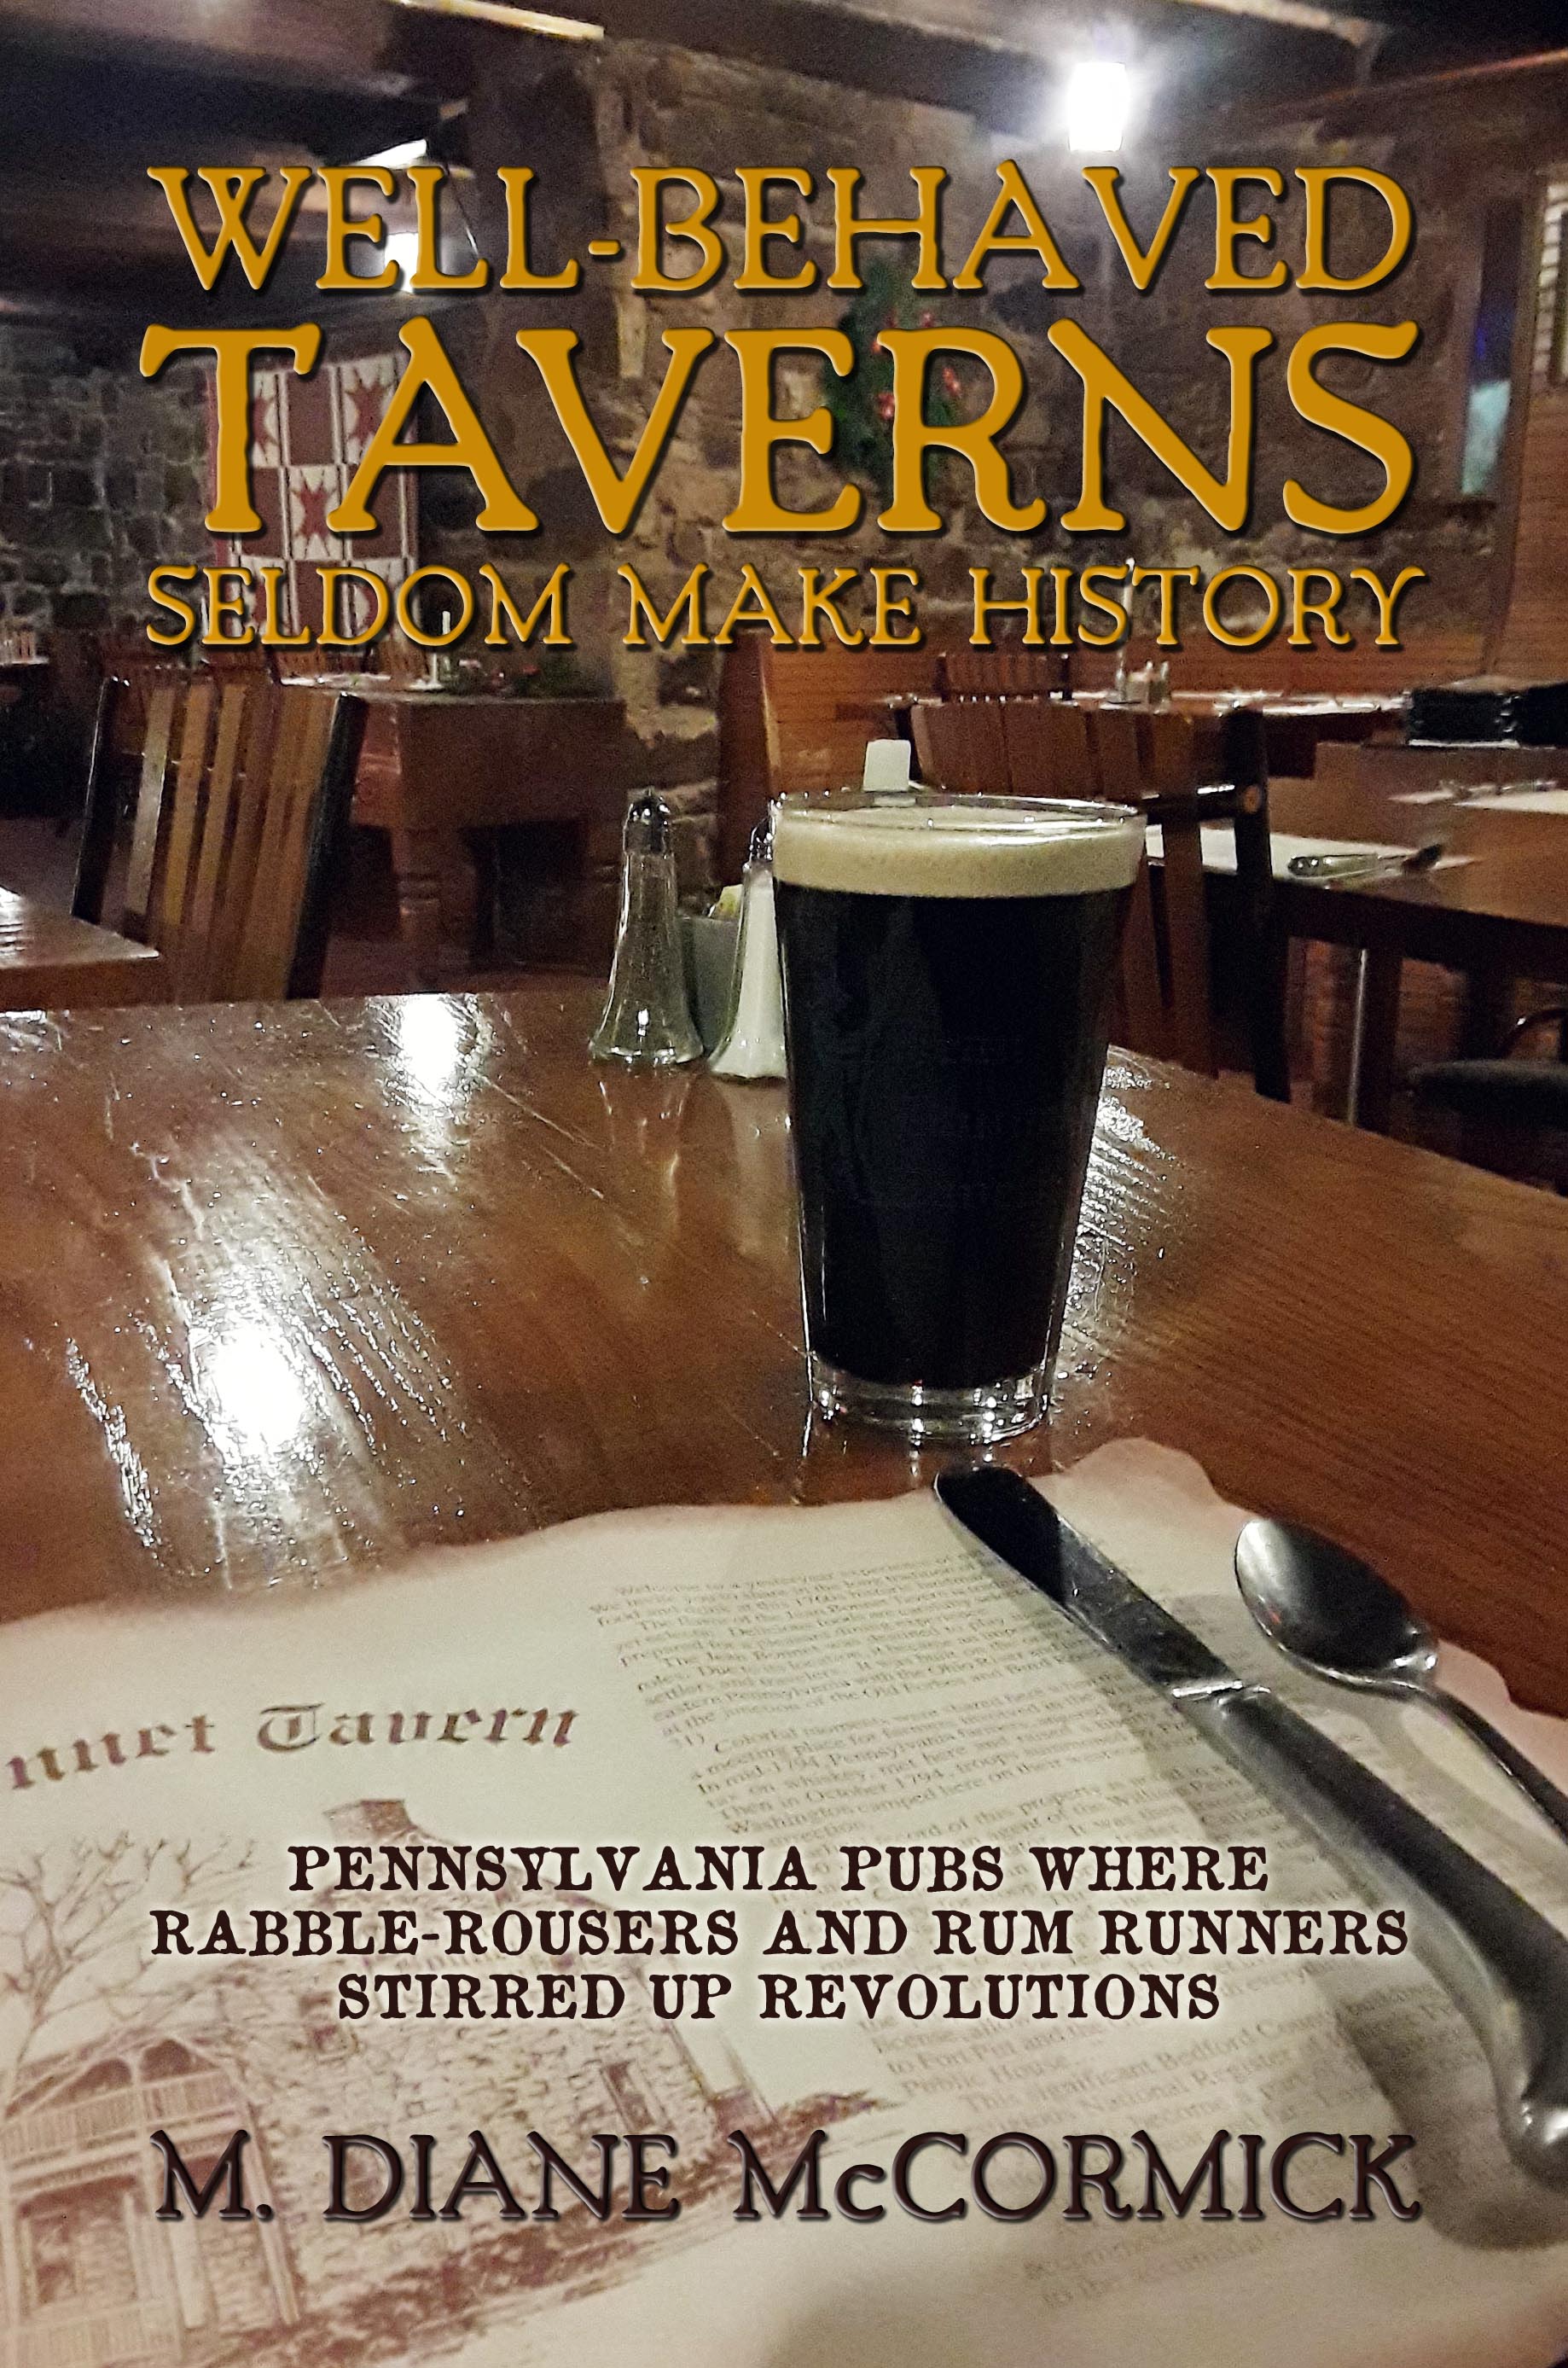 Diane McCormick’s “Well-behaved Taverns Seldom Make History” repeats as the Sunbury Press bestseller for December